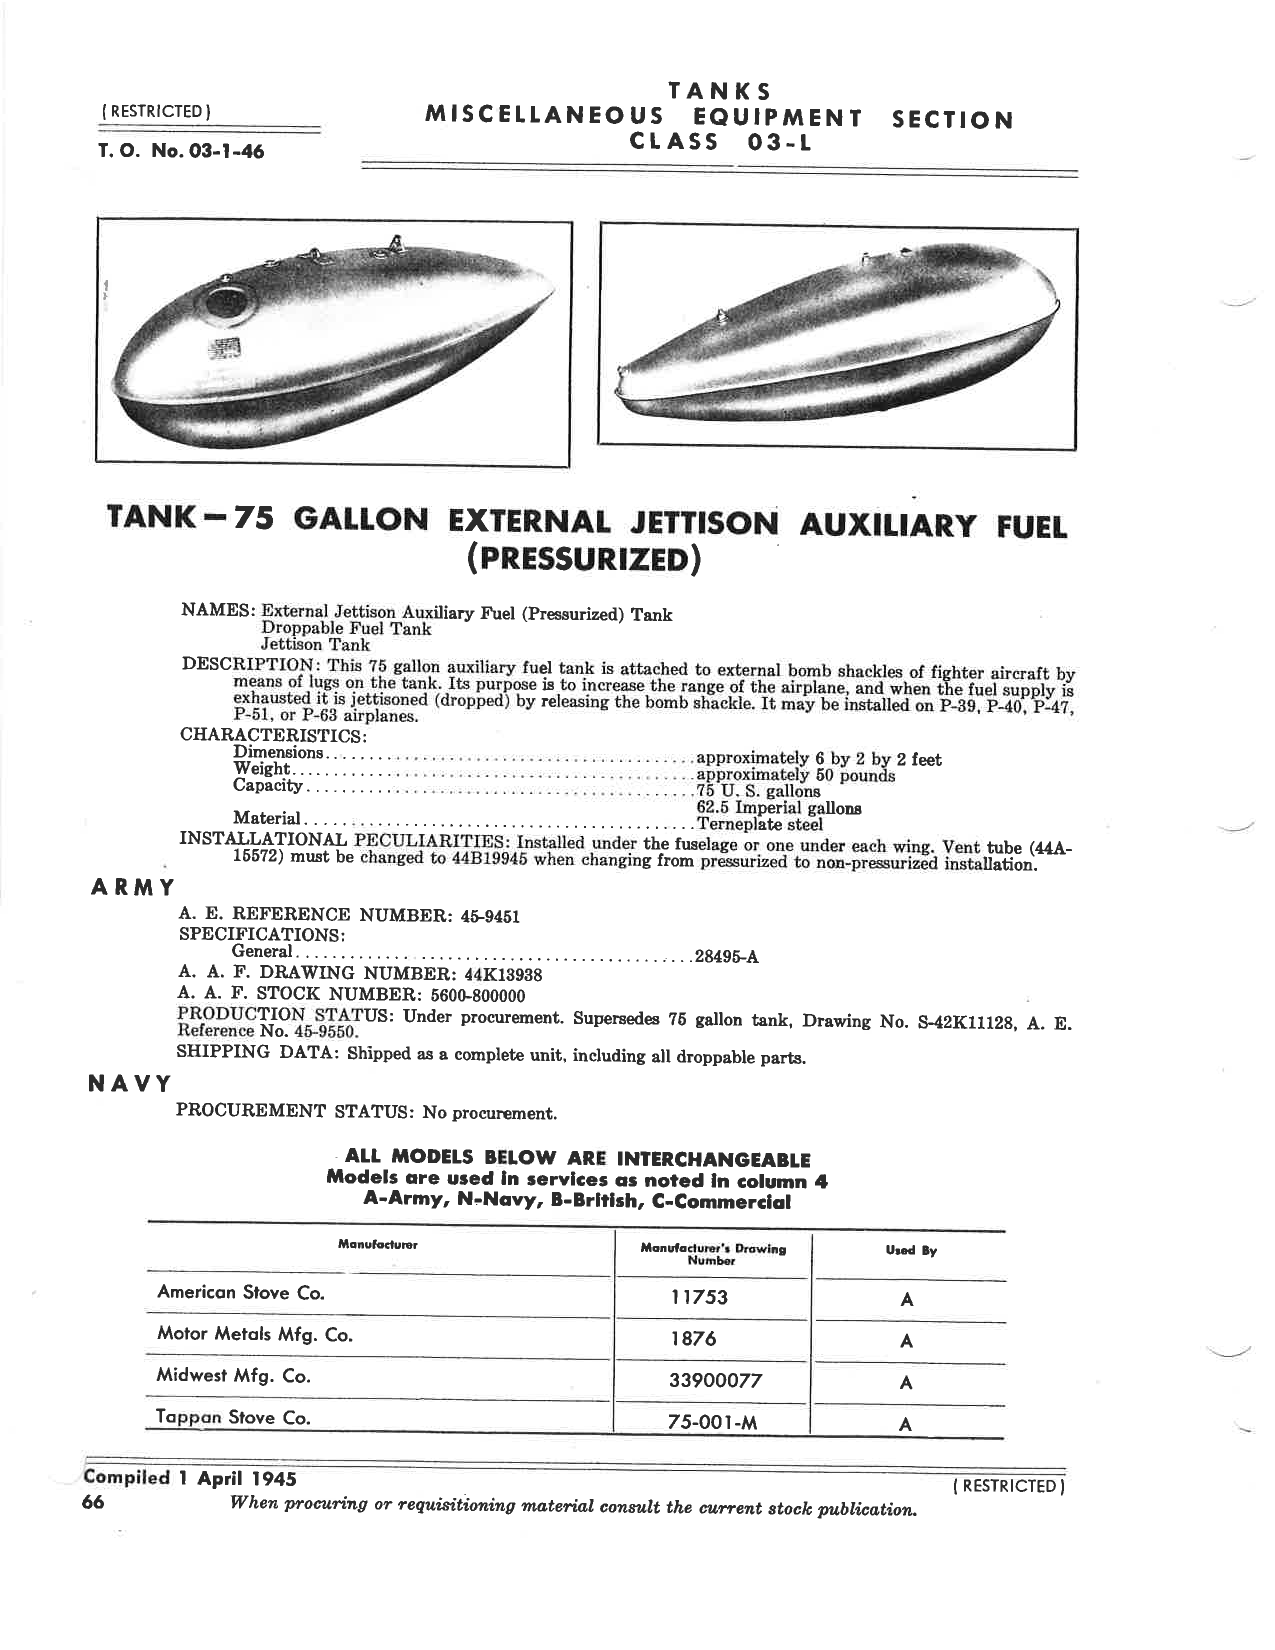 Sample page 3 from AirCorps Library document: Tanks - Misc Equipment Section - Class 03-L